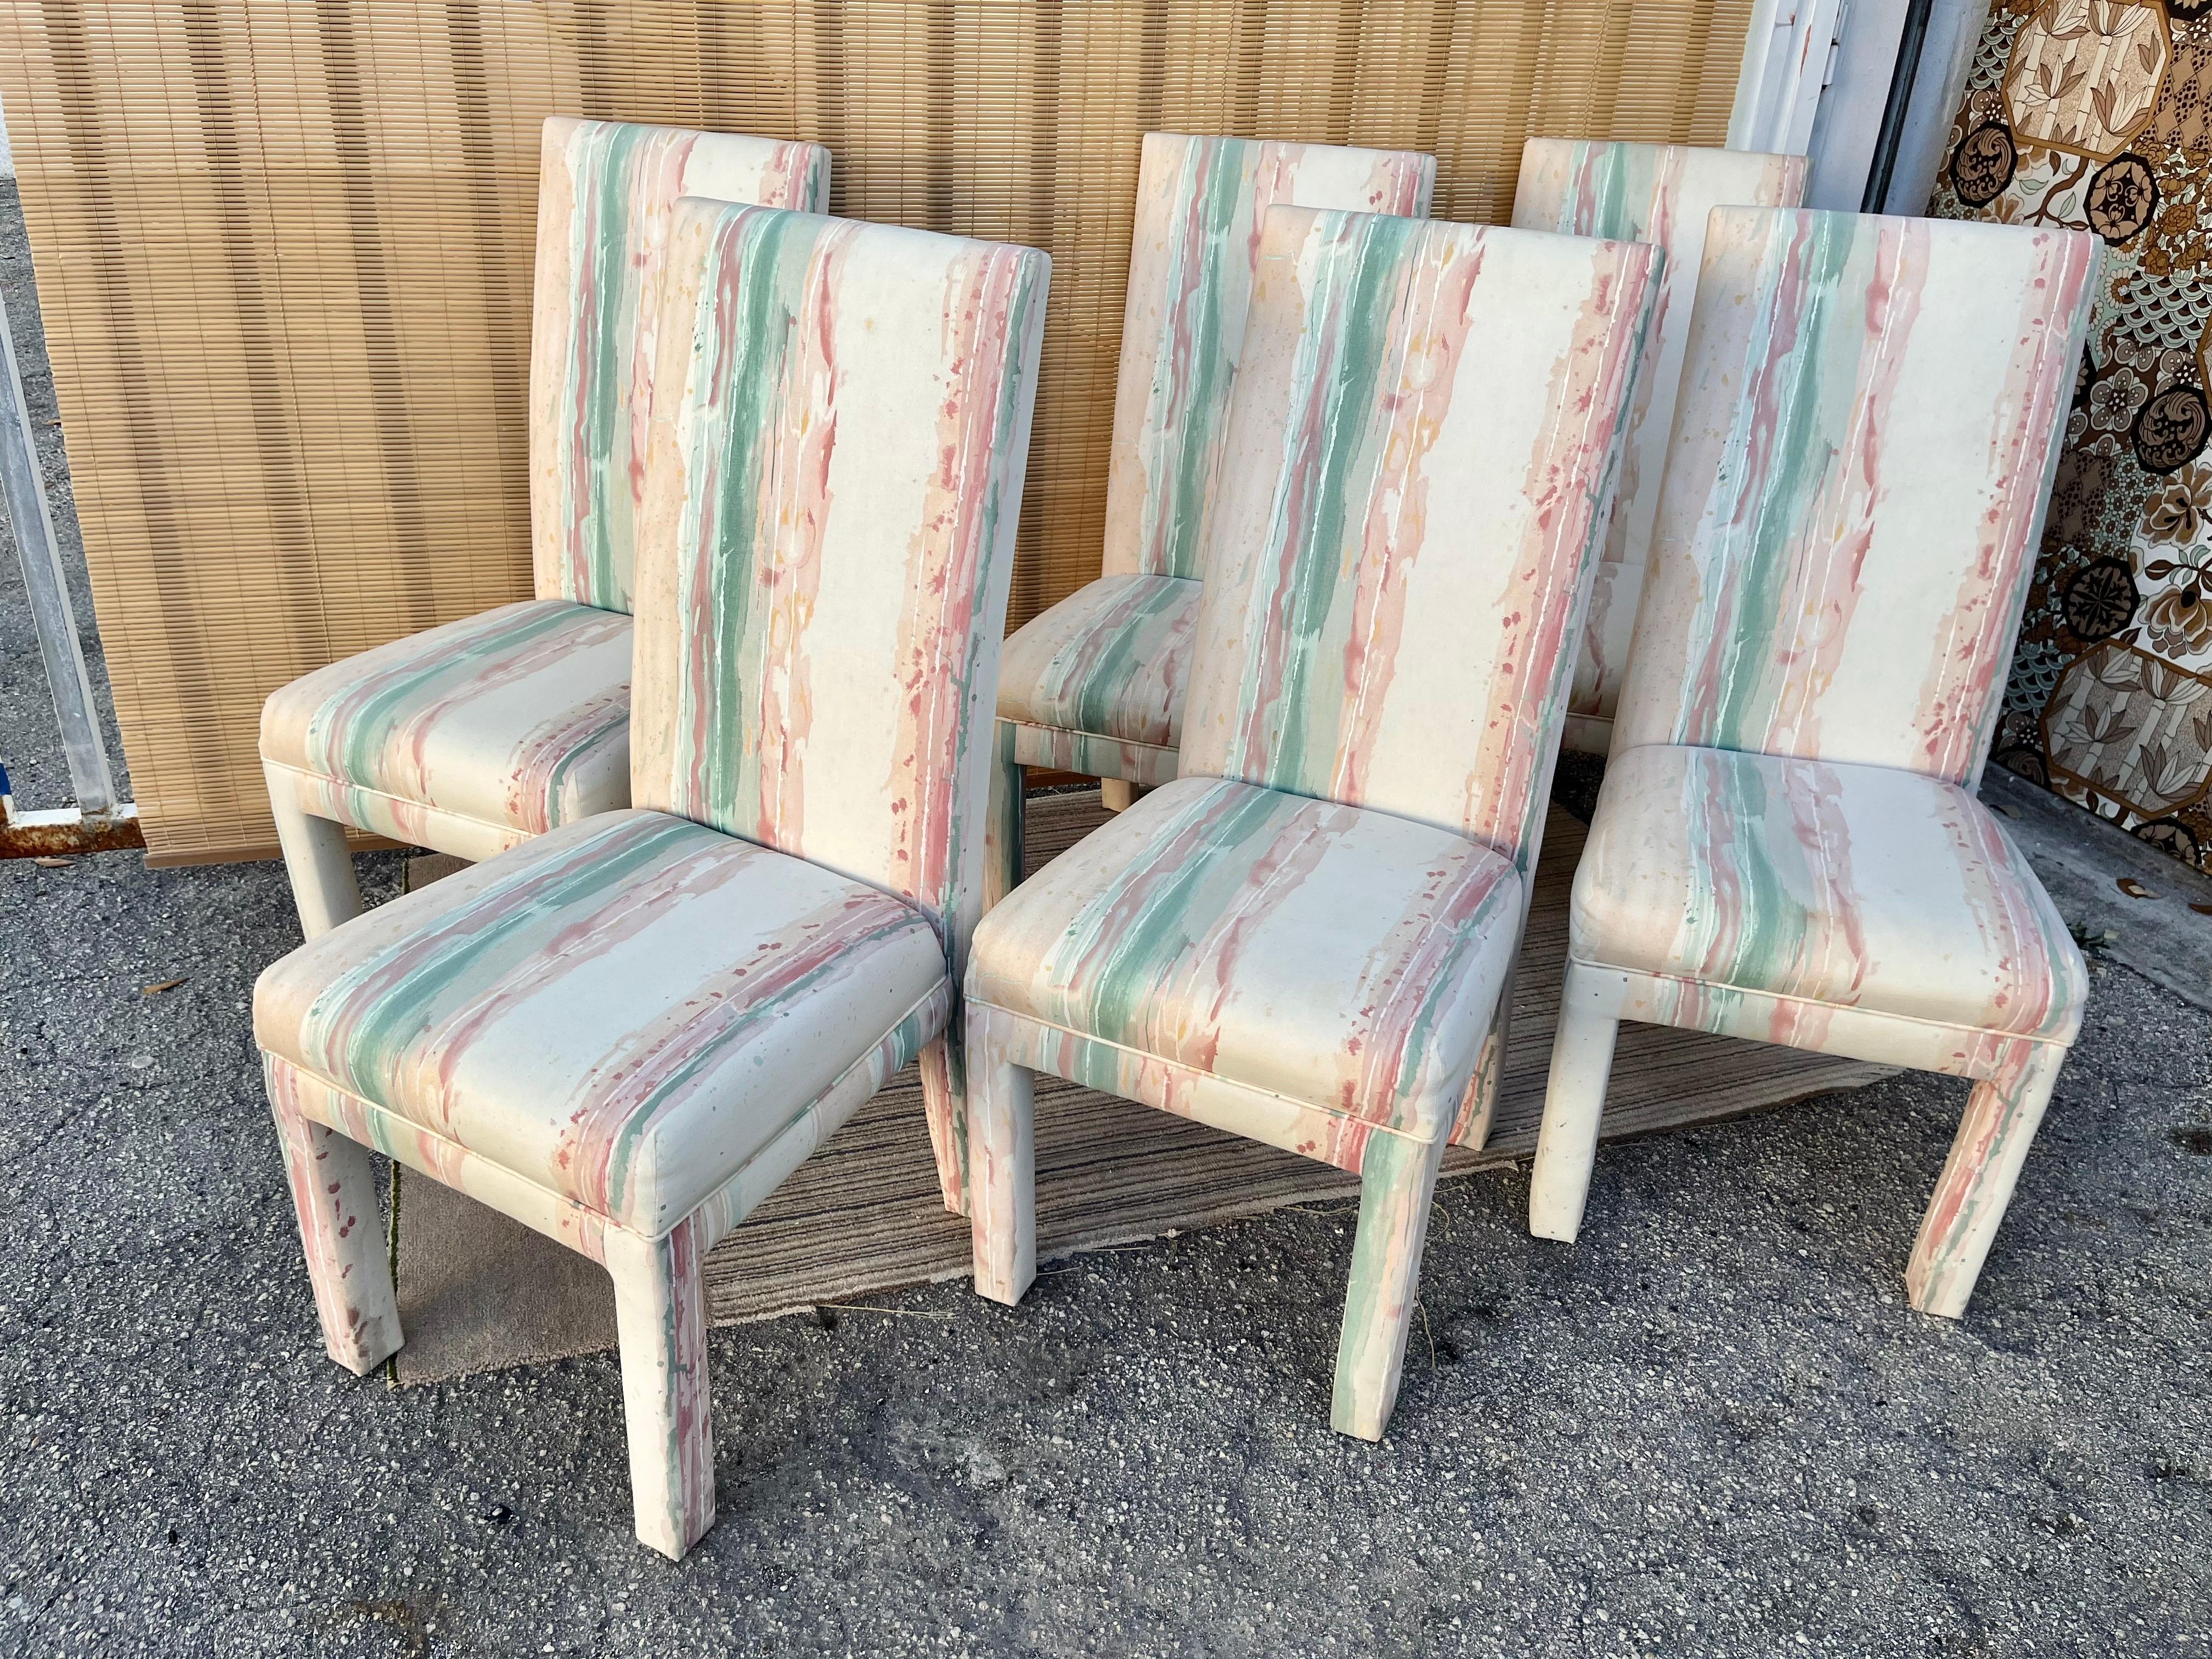 A set of Six Postmodern sculptural high back fully Upholstered dining chairs. Circa Mid 1980s 
Feature the original 1980s sponged and splatter pattern upholstery in pastel cream, peach, tan, and teal tones.
In excellent near mint original